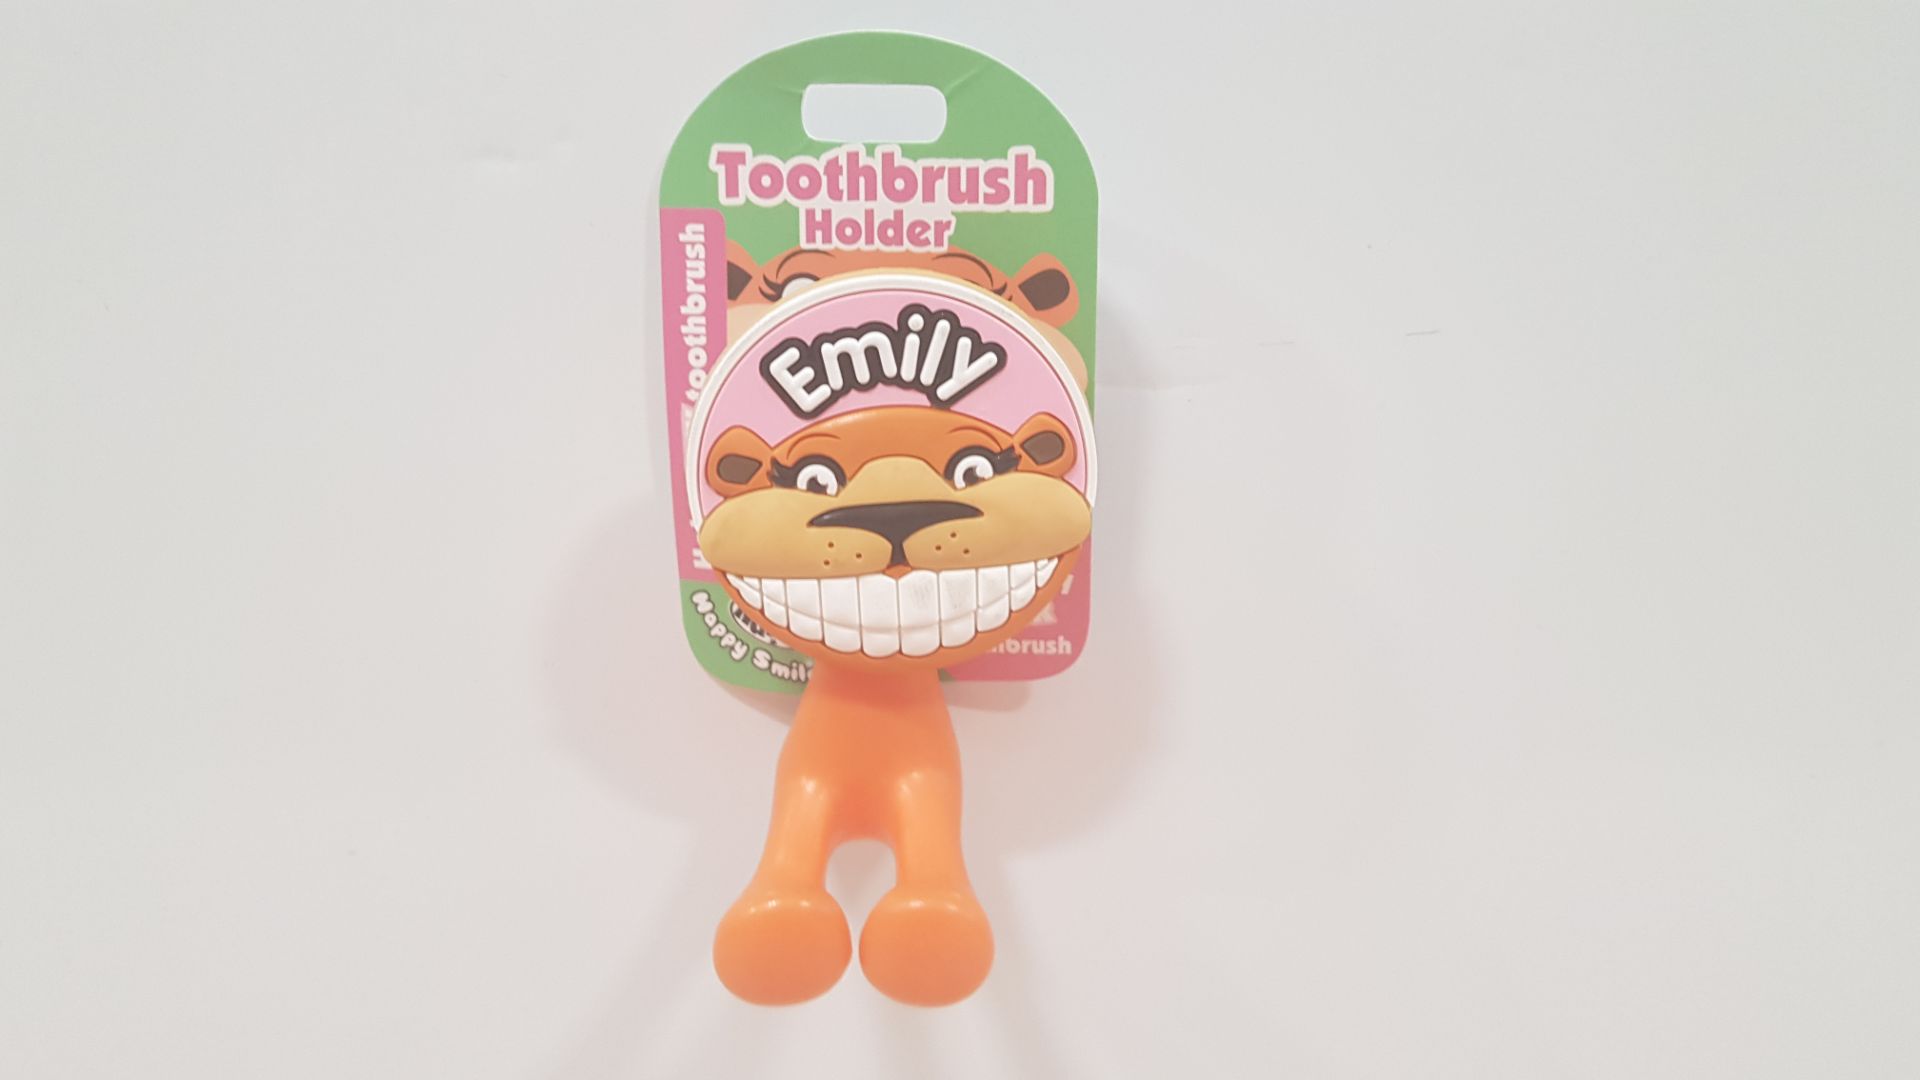 14000+ MY NAME TOOTHBRUSH HOLDERS IN VARIOUS NAMES IE. EMILY, HARRY, SOPHIE, JOSEPH, DAUGHTER,